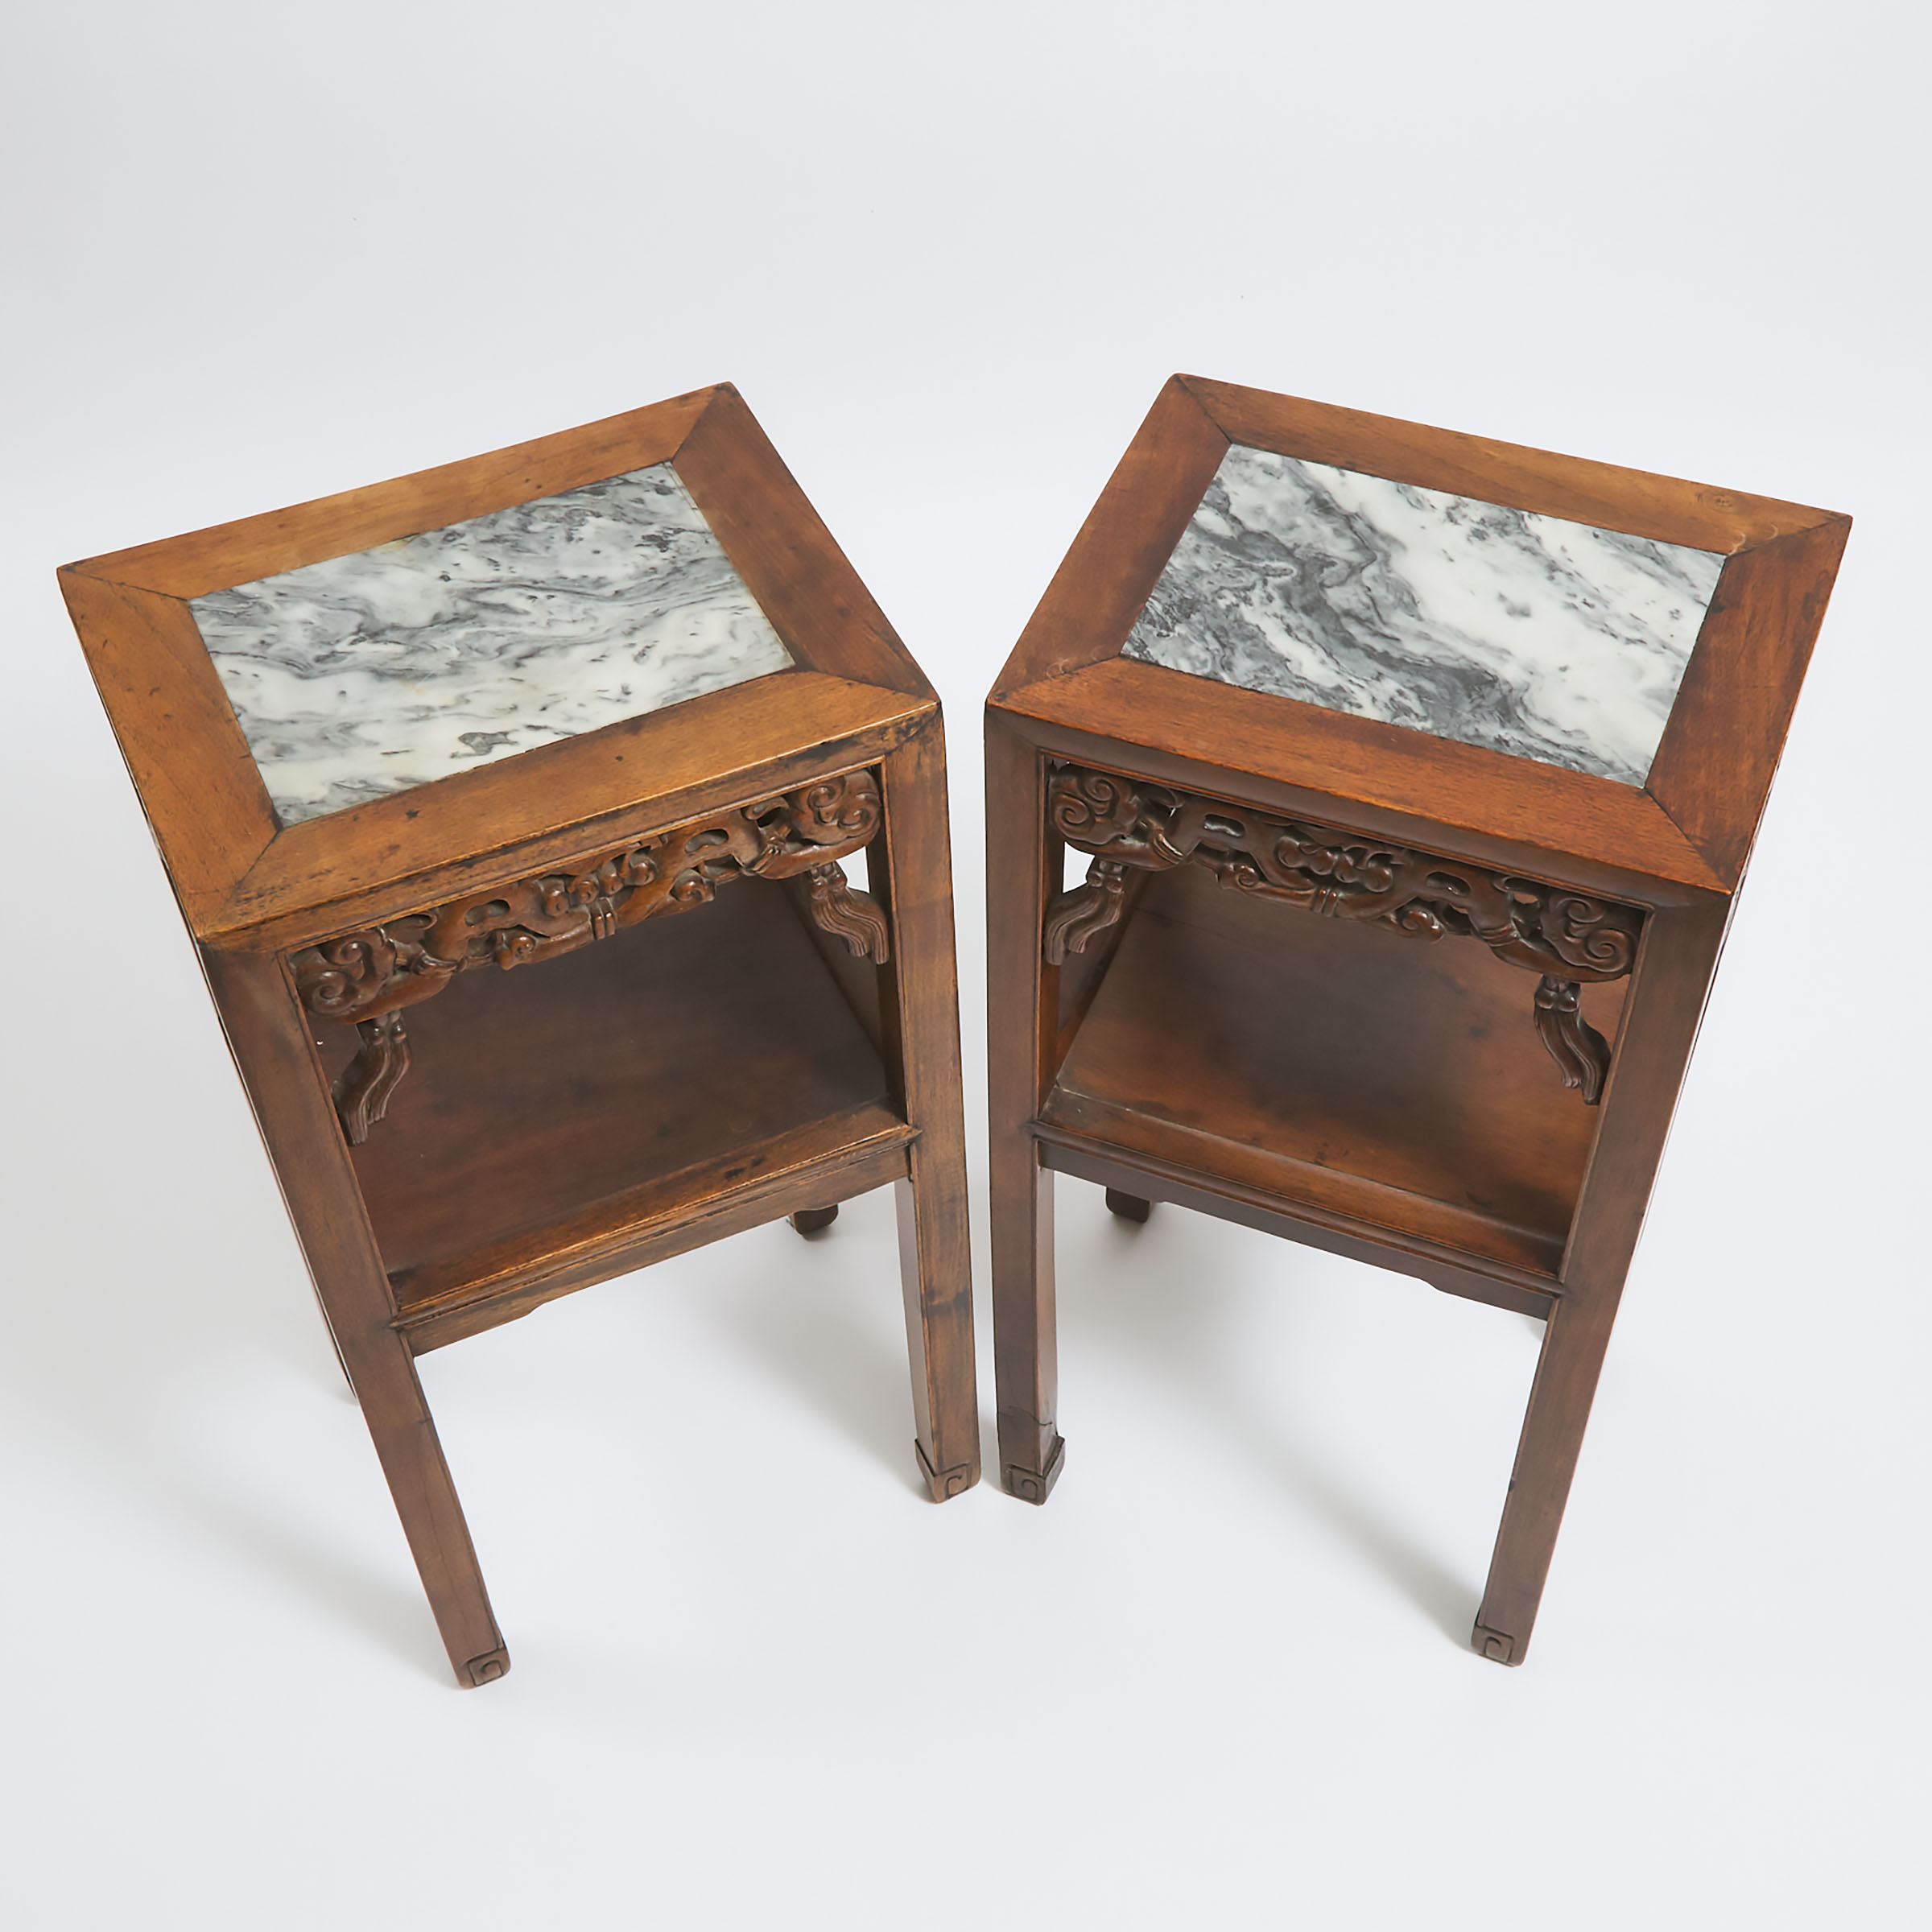 A Pair of Chinese Marble-Inset Rosewood Side Tables, Late 19th/Early 20th Century 